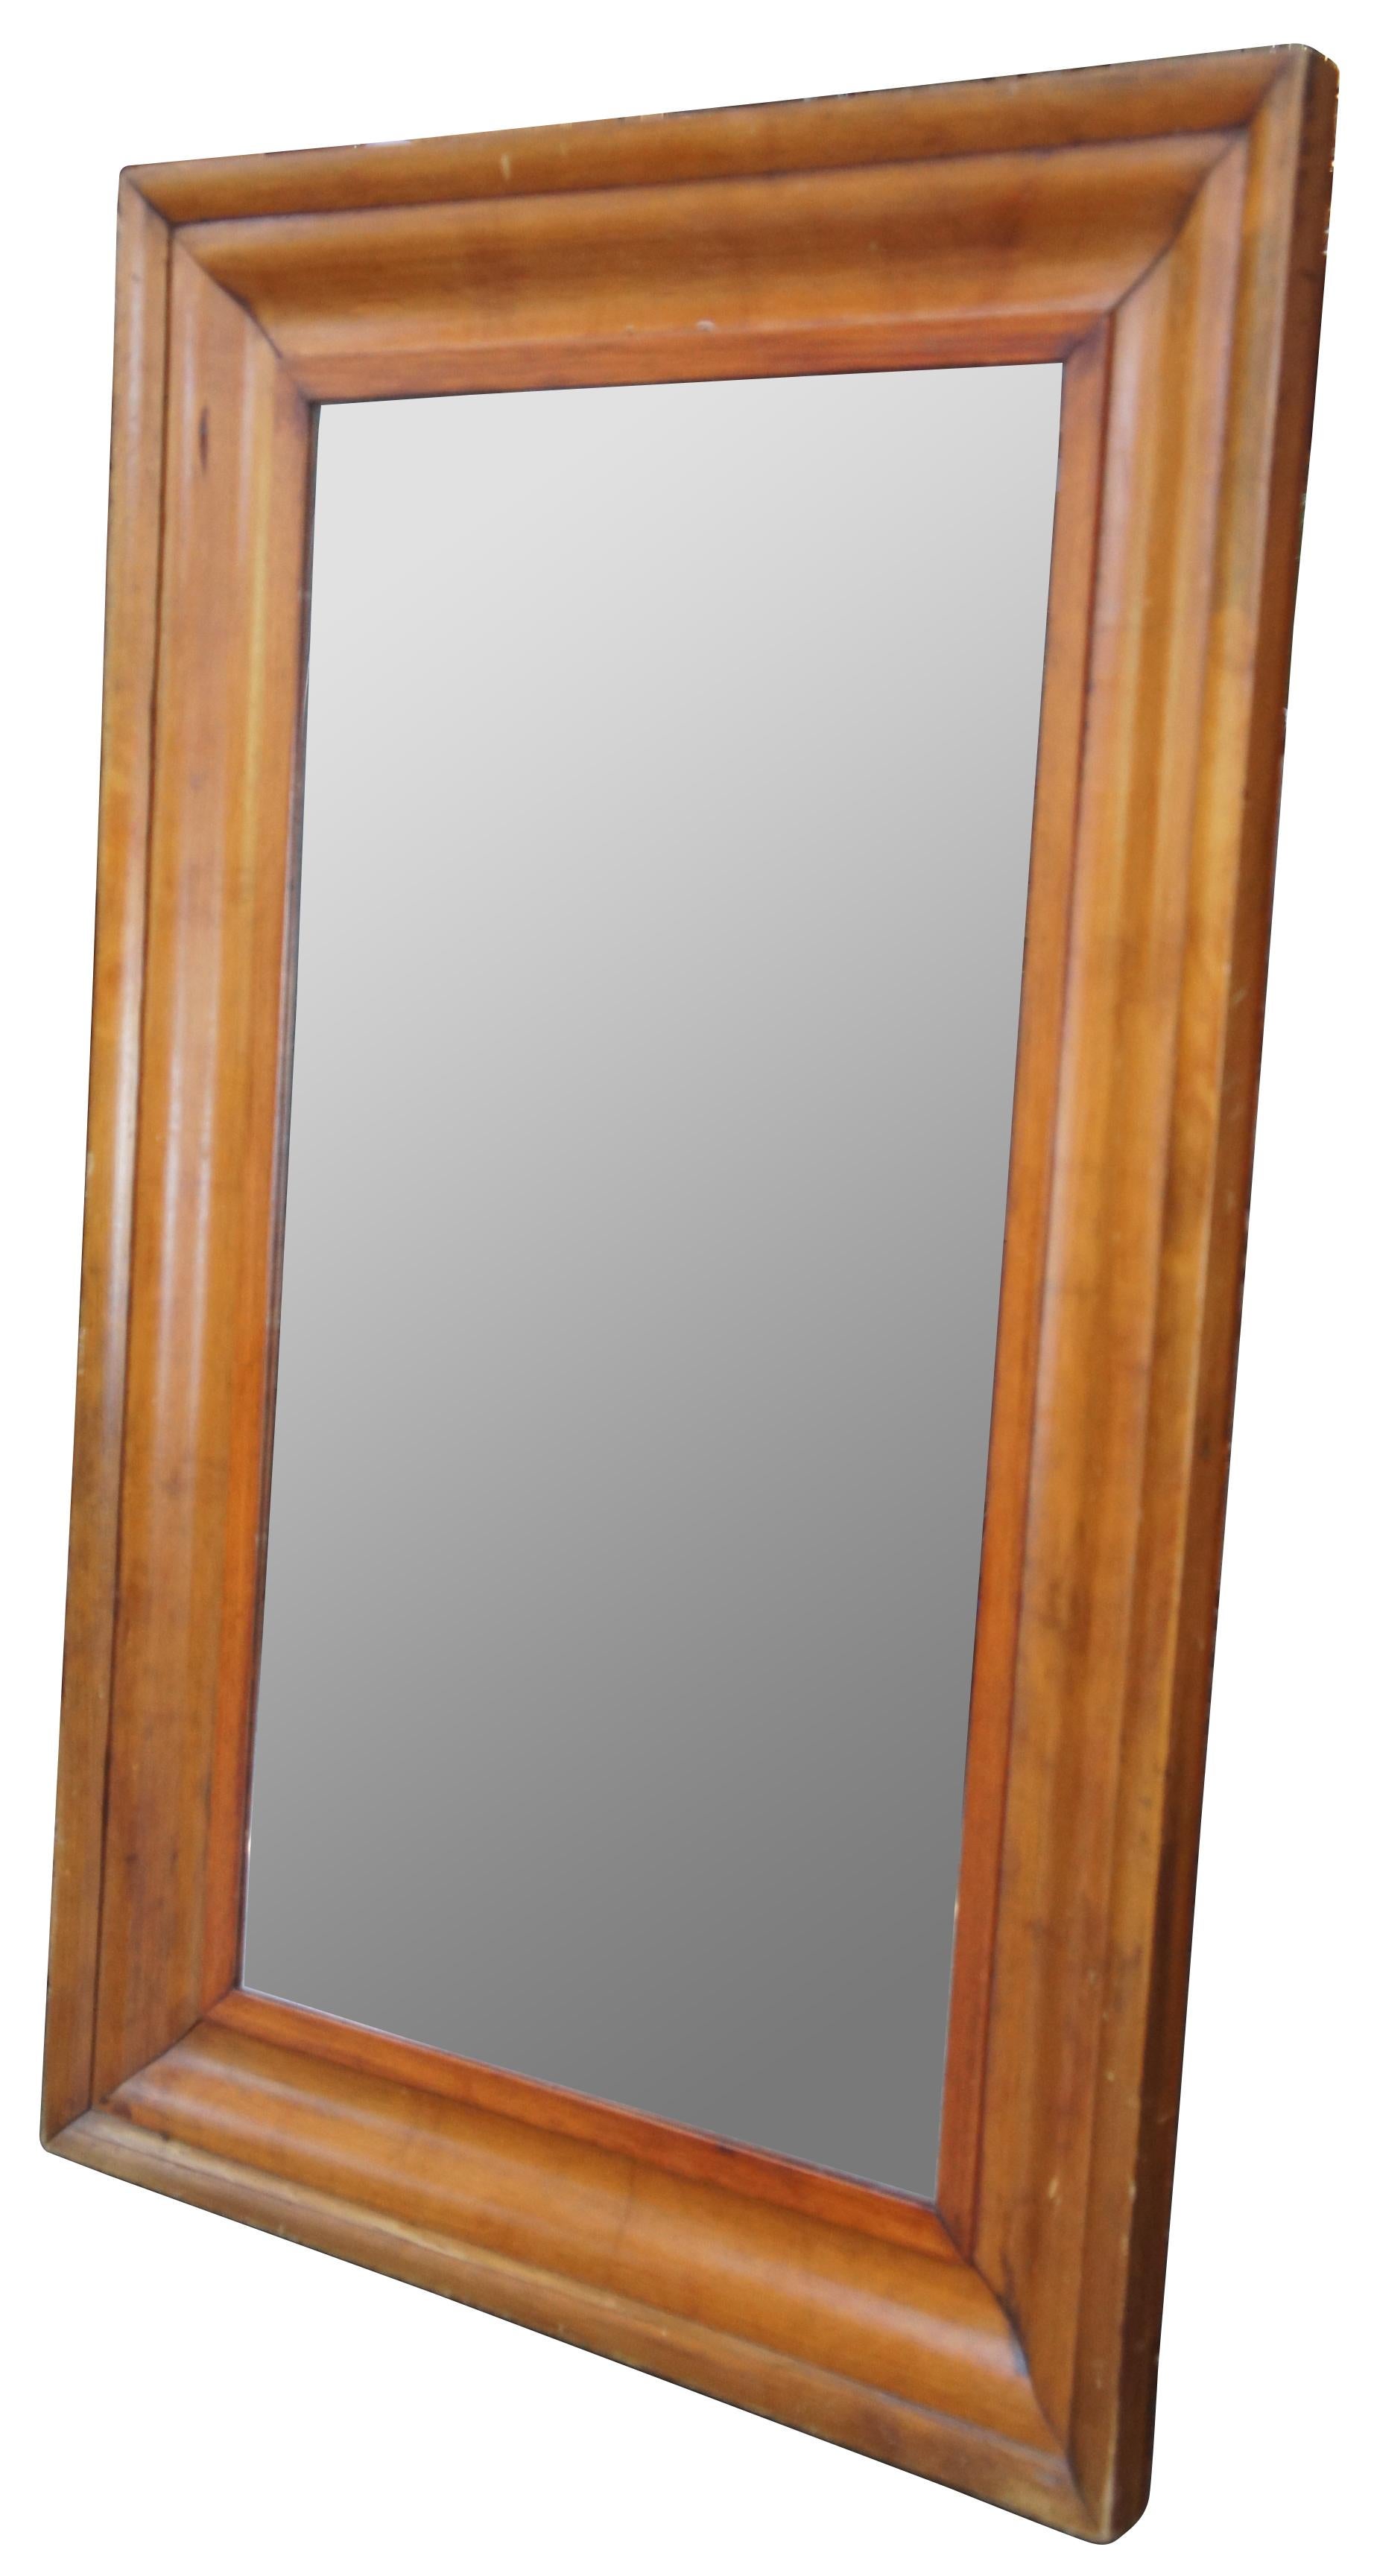 Antique 19th century ogee wall hanging mirror. Made from pine. 

mirror 20